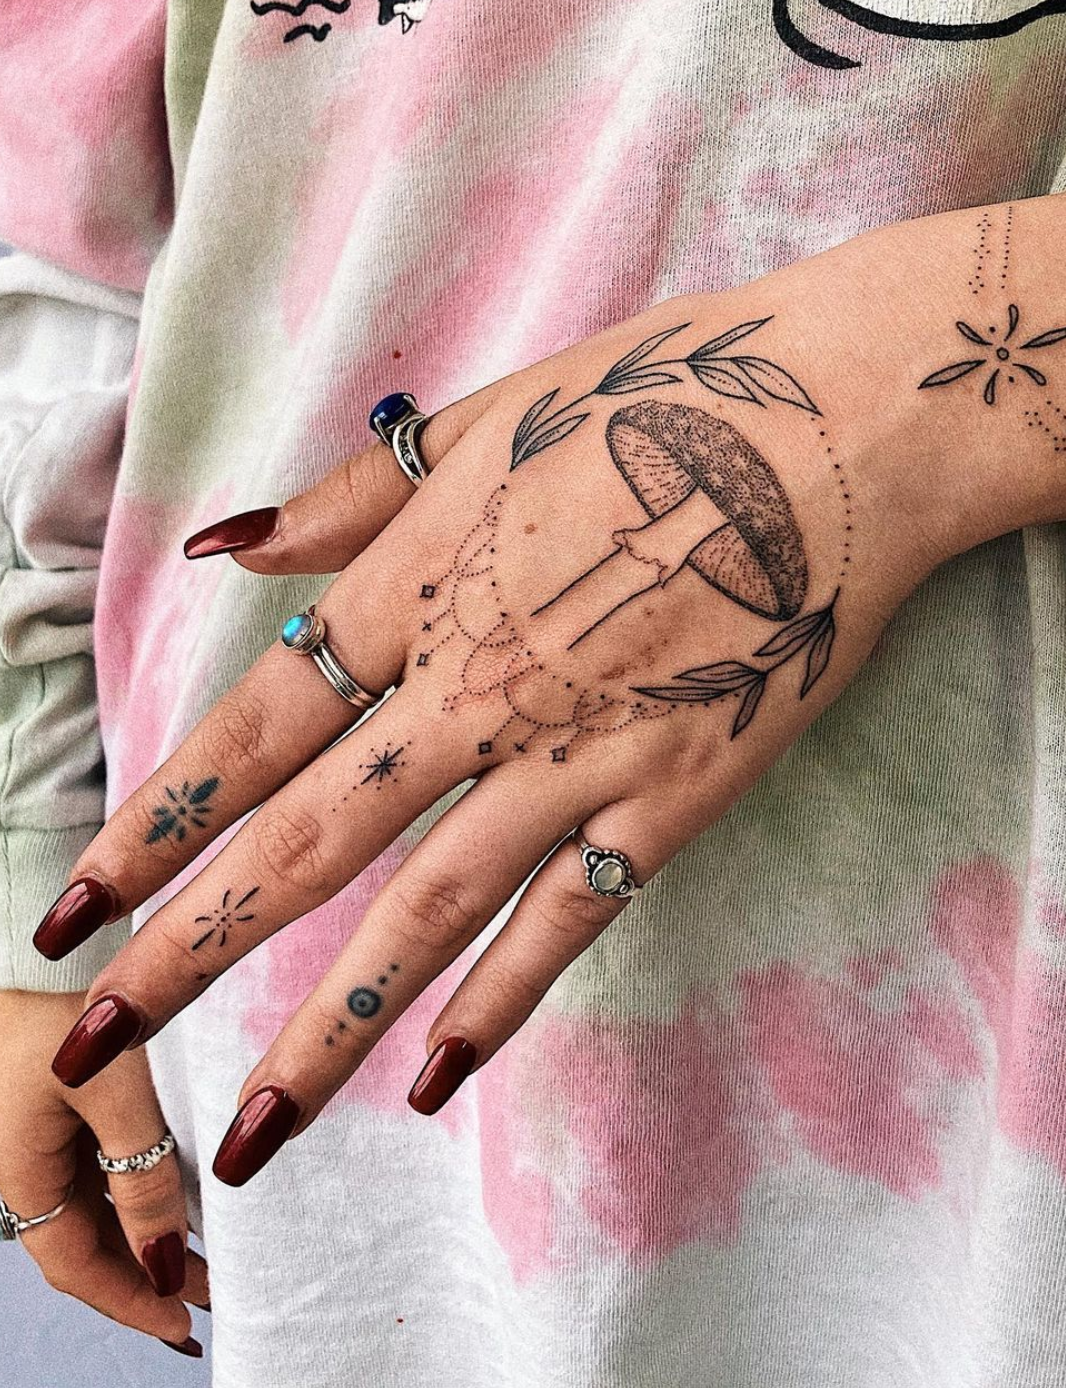 How to do hand poked tattoos